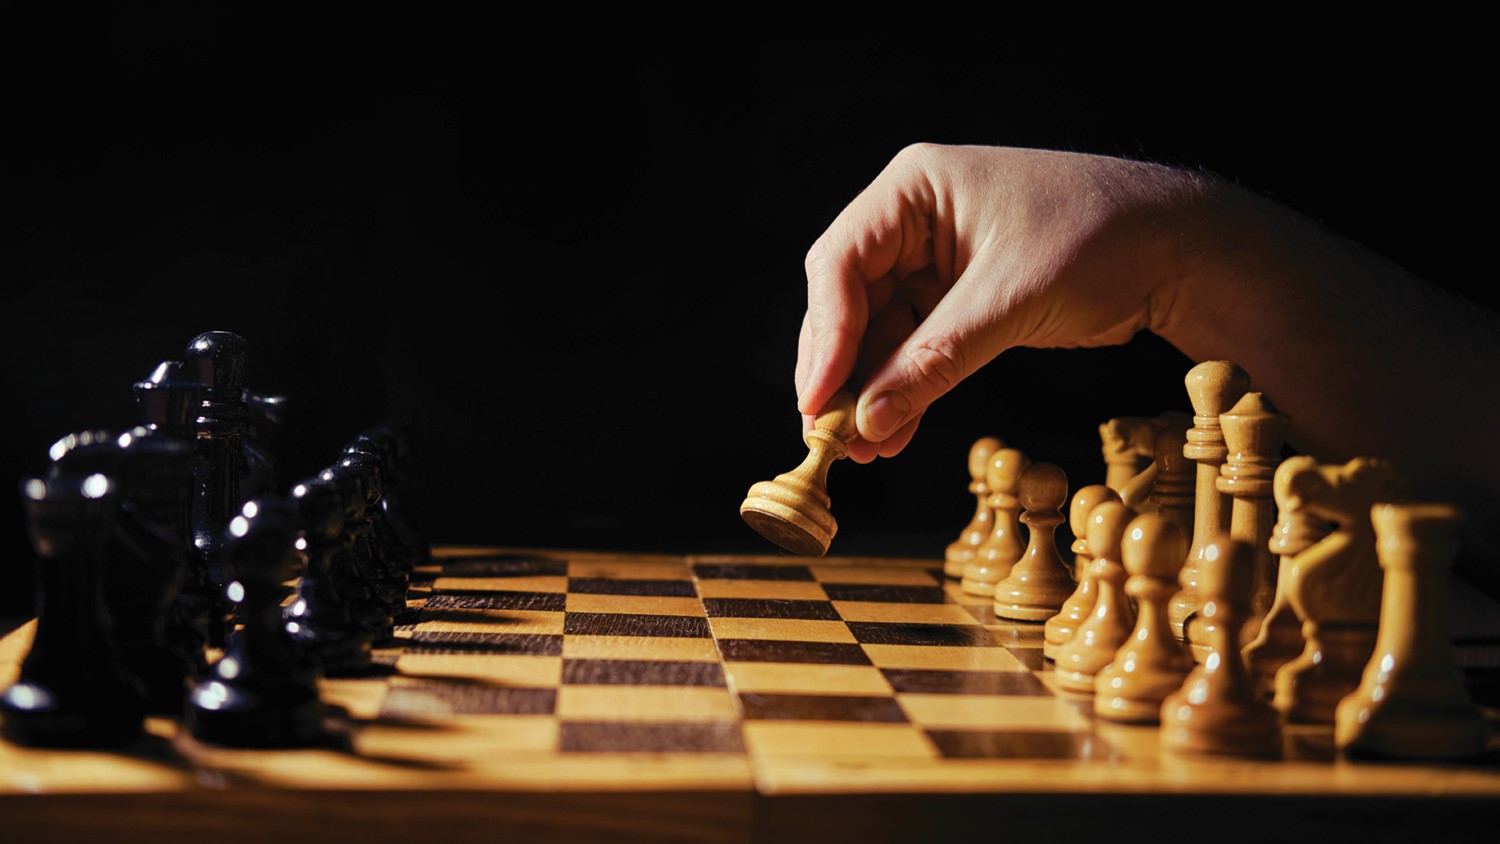 A person is putting a pawn on a chess board.